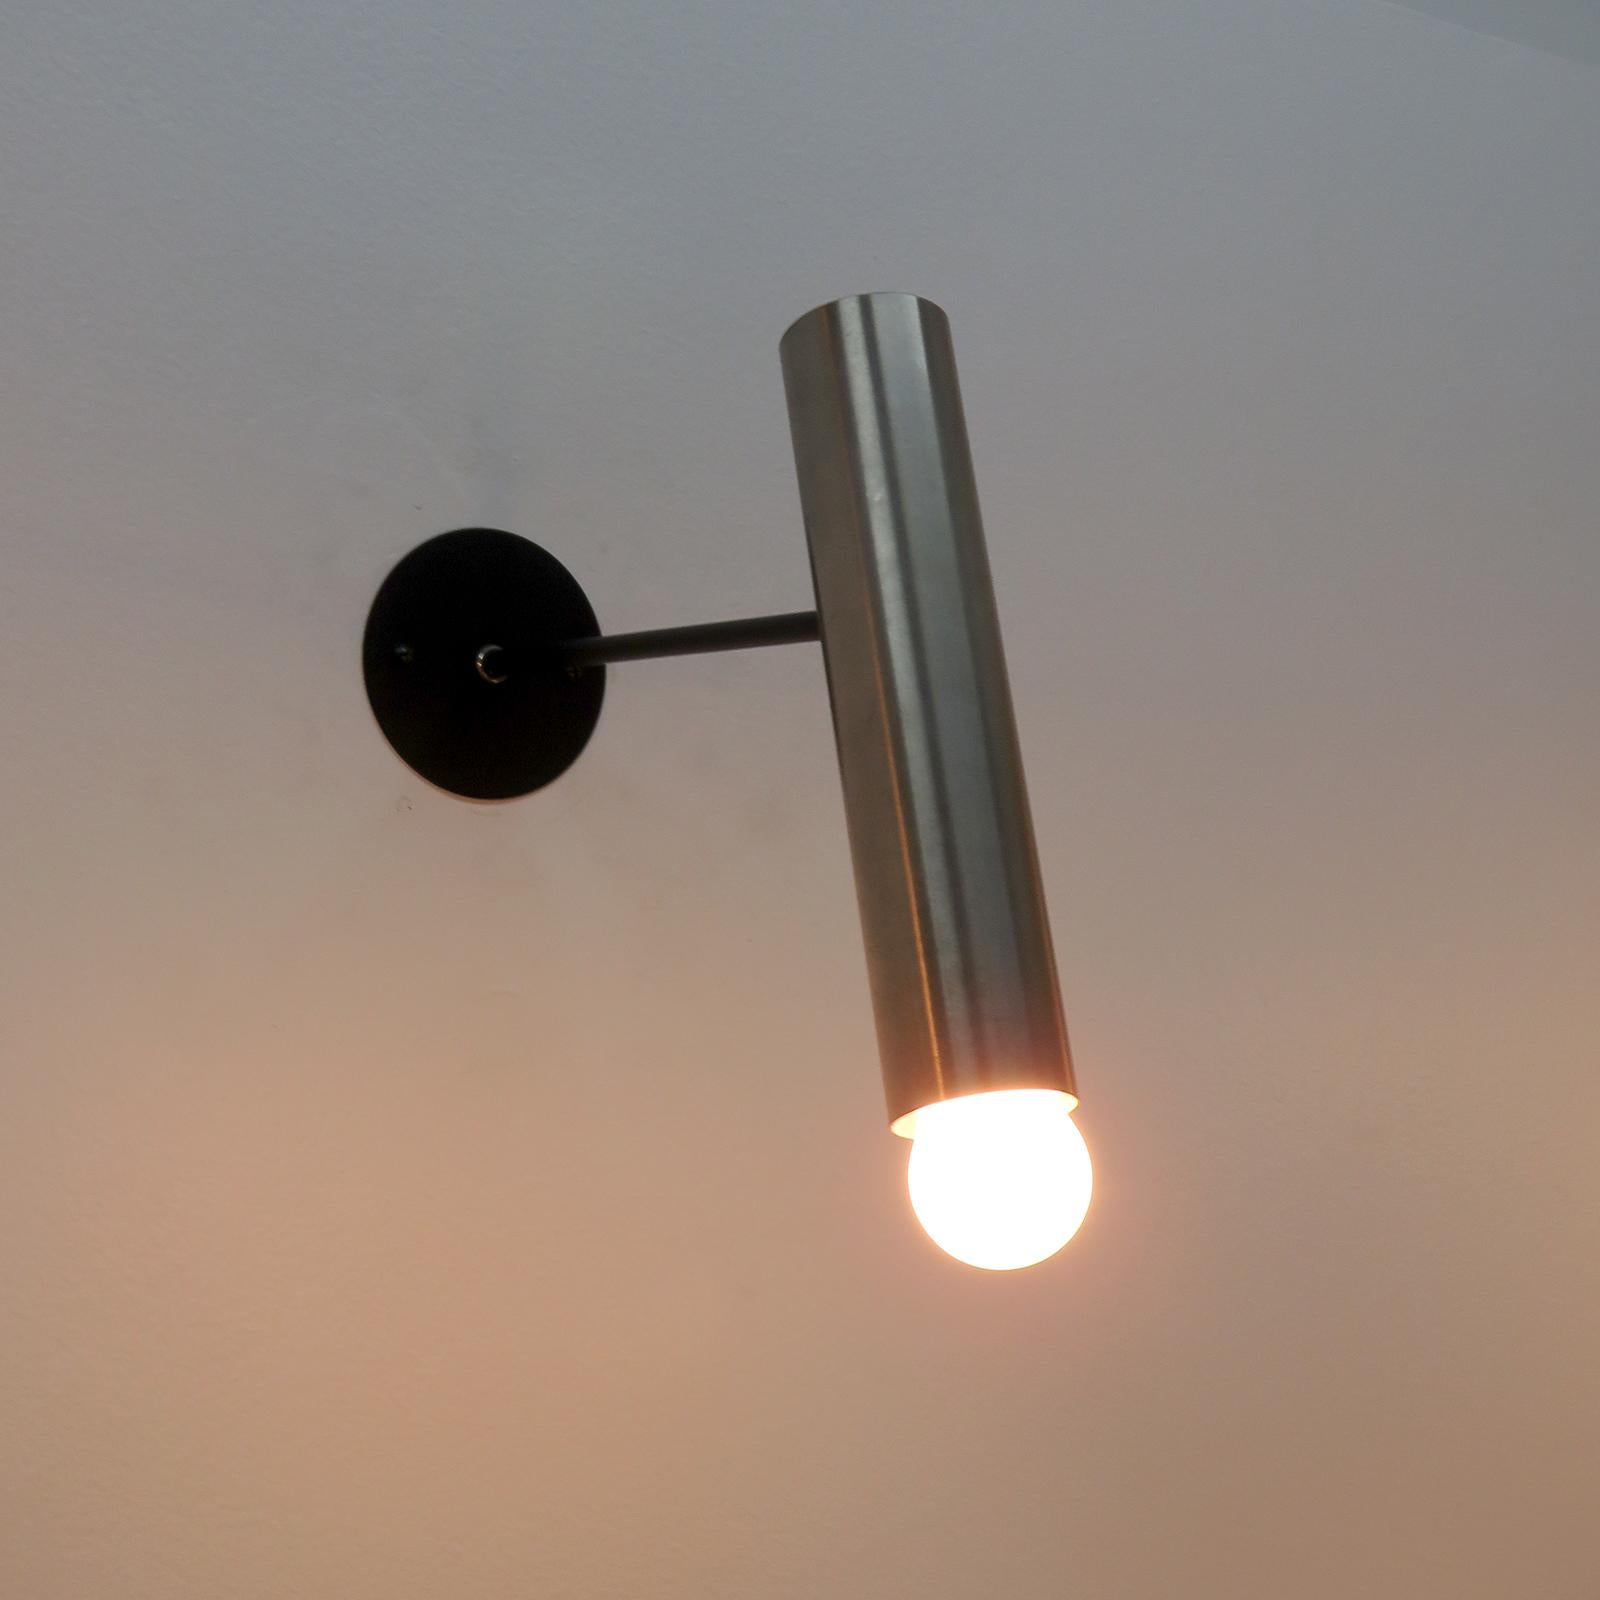 French Wall Lights by Jean Rene Cailette for Parscot, 1960 For Sale 3